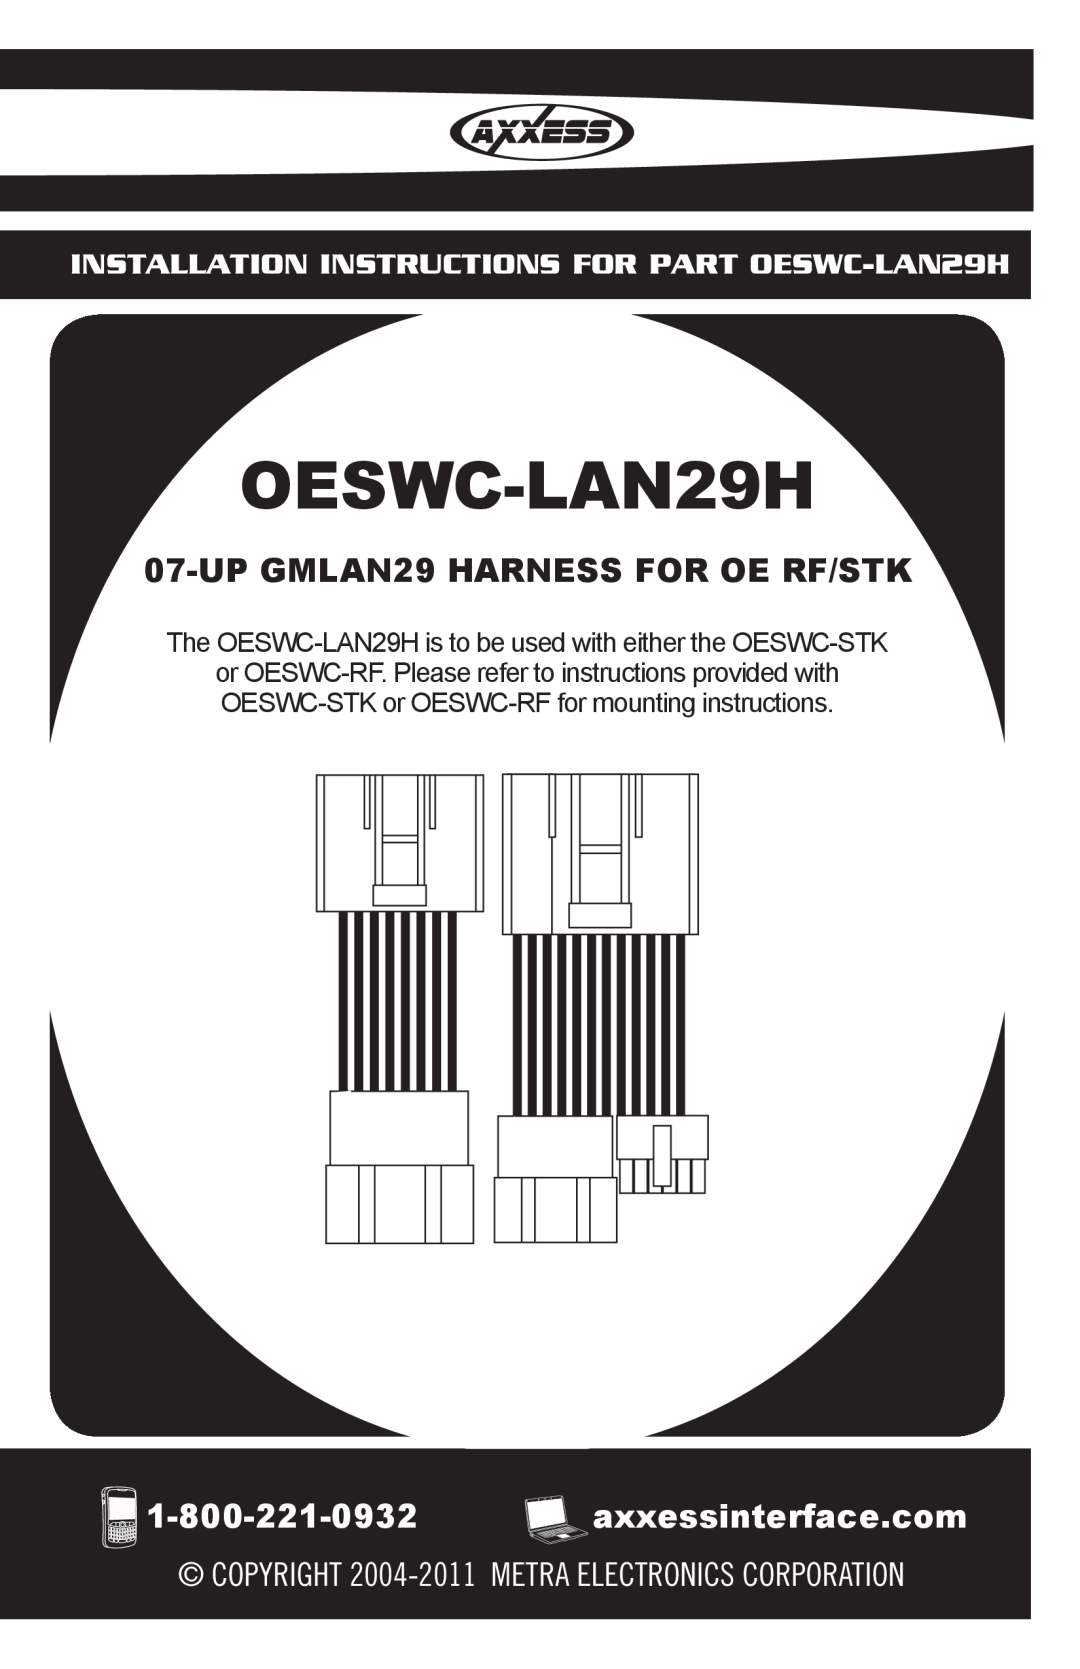 Axxess Interface OESWC-LAN29H installation instructions UPGMLAN29 HARNESS FOR OE RF/STK 